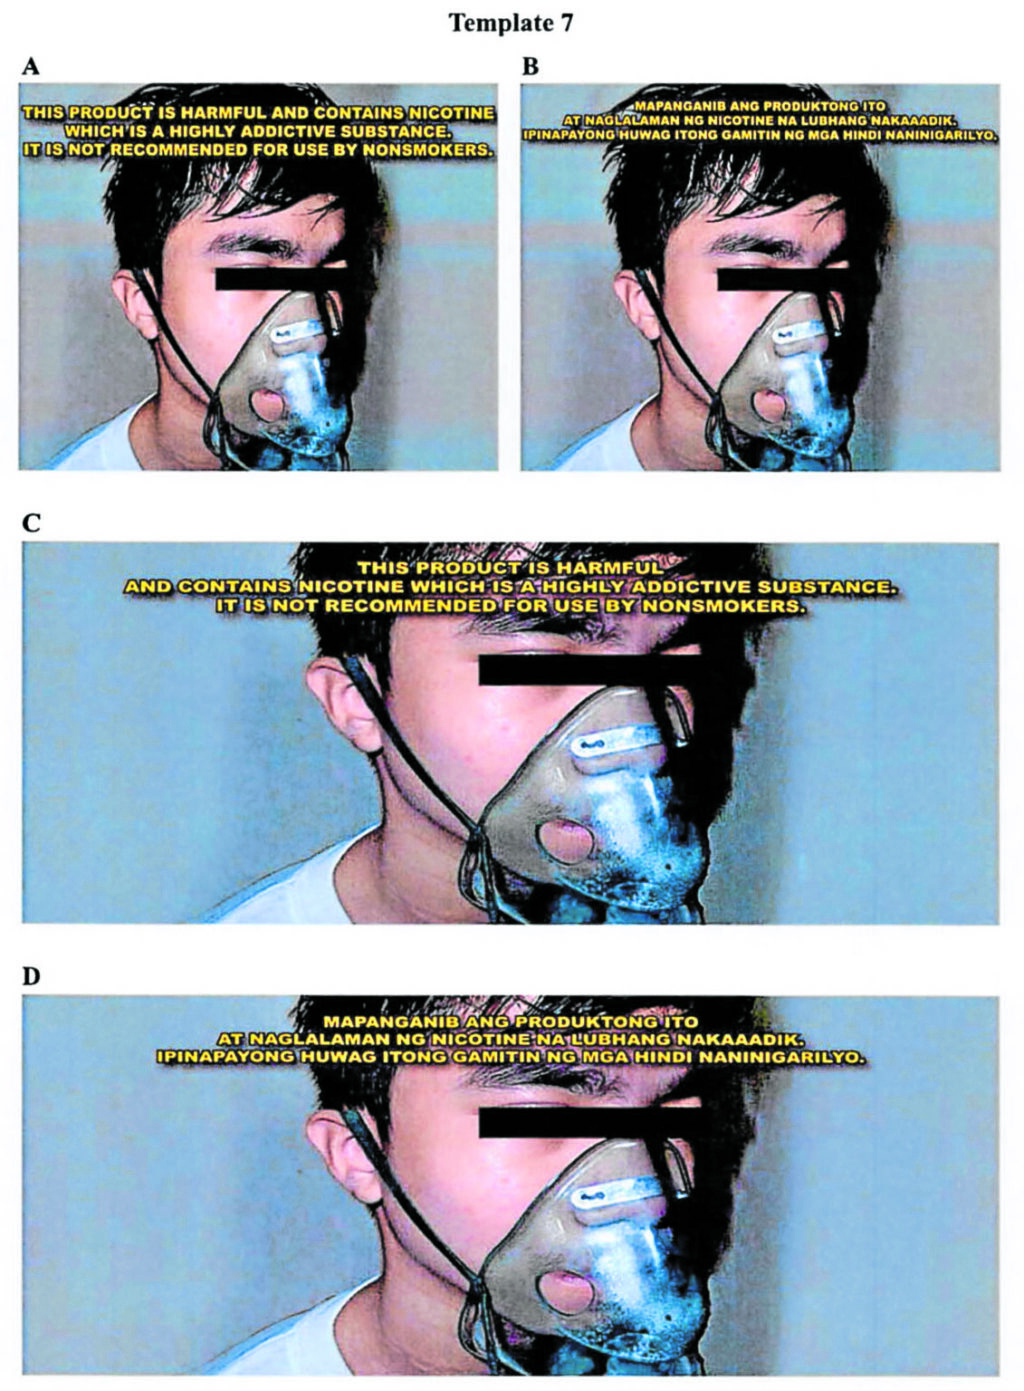 Some of the template healthwarnings that will appear in e-cigarettes and vapes show a young man in an oxygen mask, to demonstrate their harmful effect on one’s lungs.